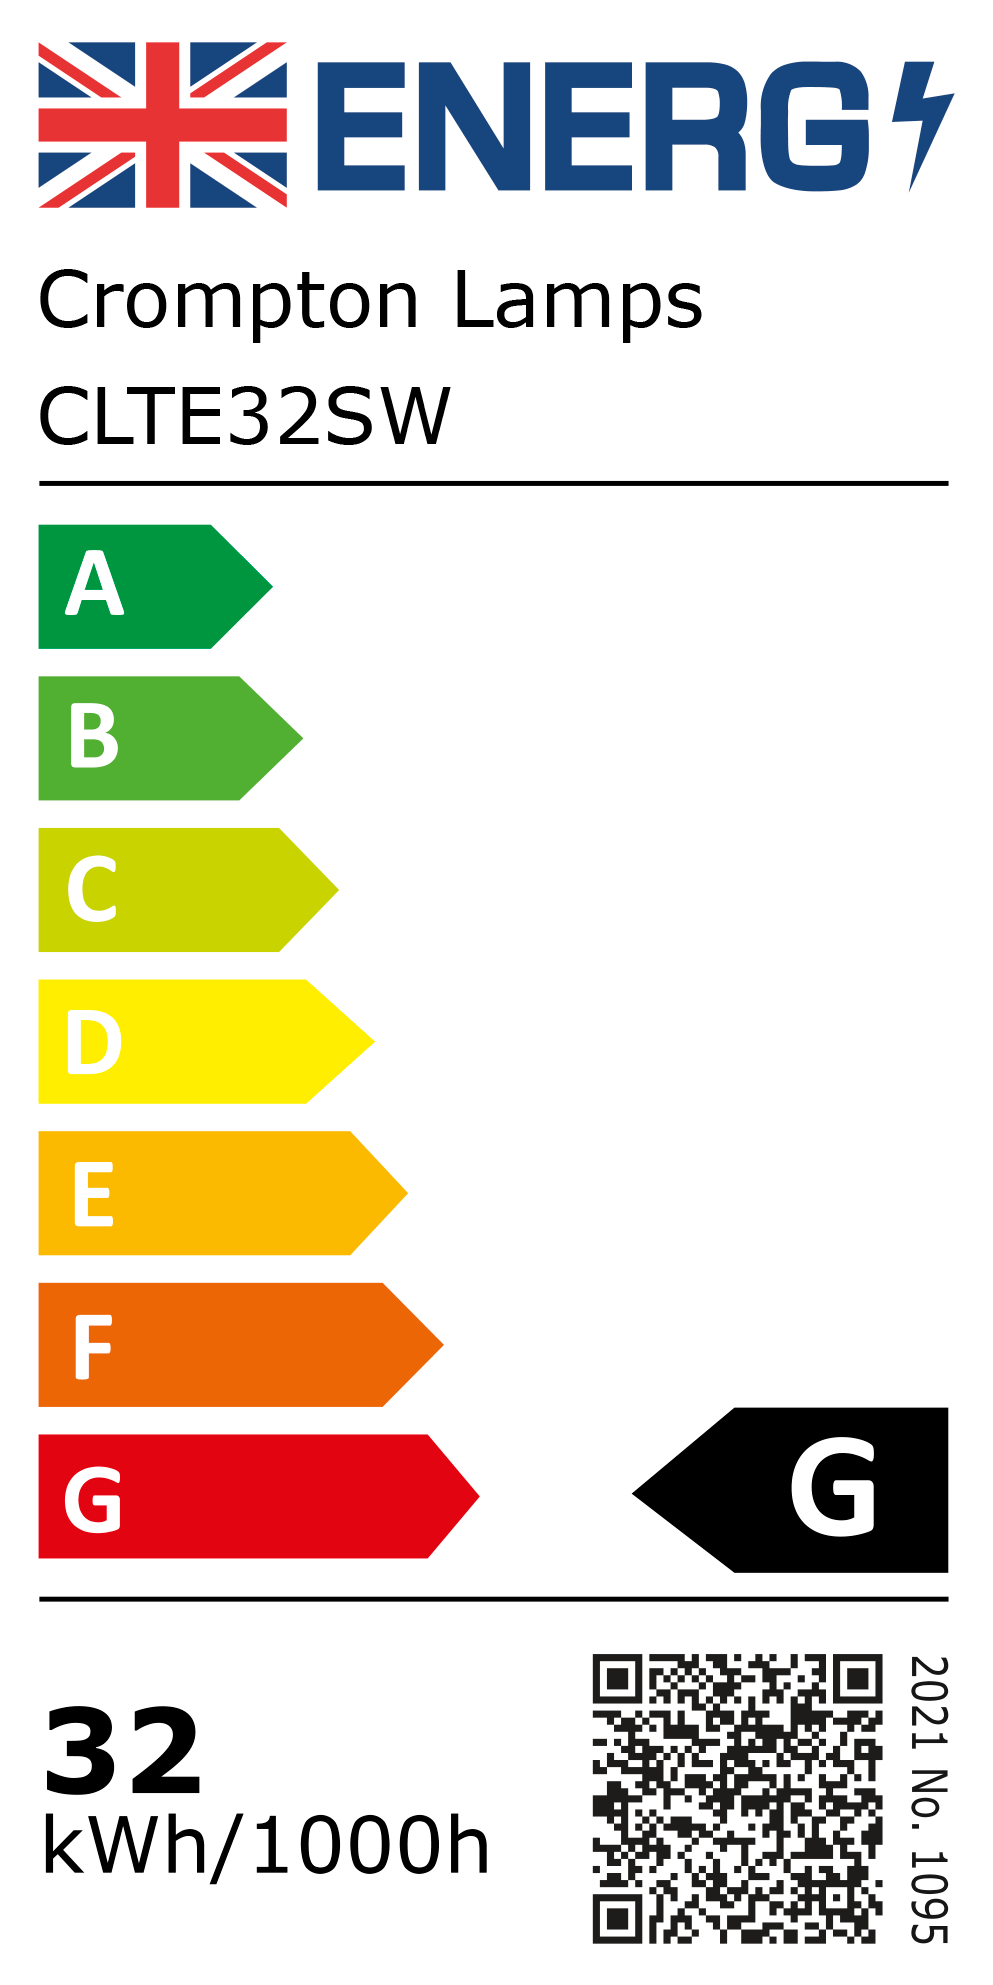 New 2021 Energy Rating Label: Stock Code CLTE32SW